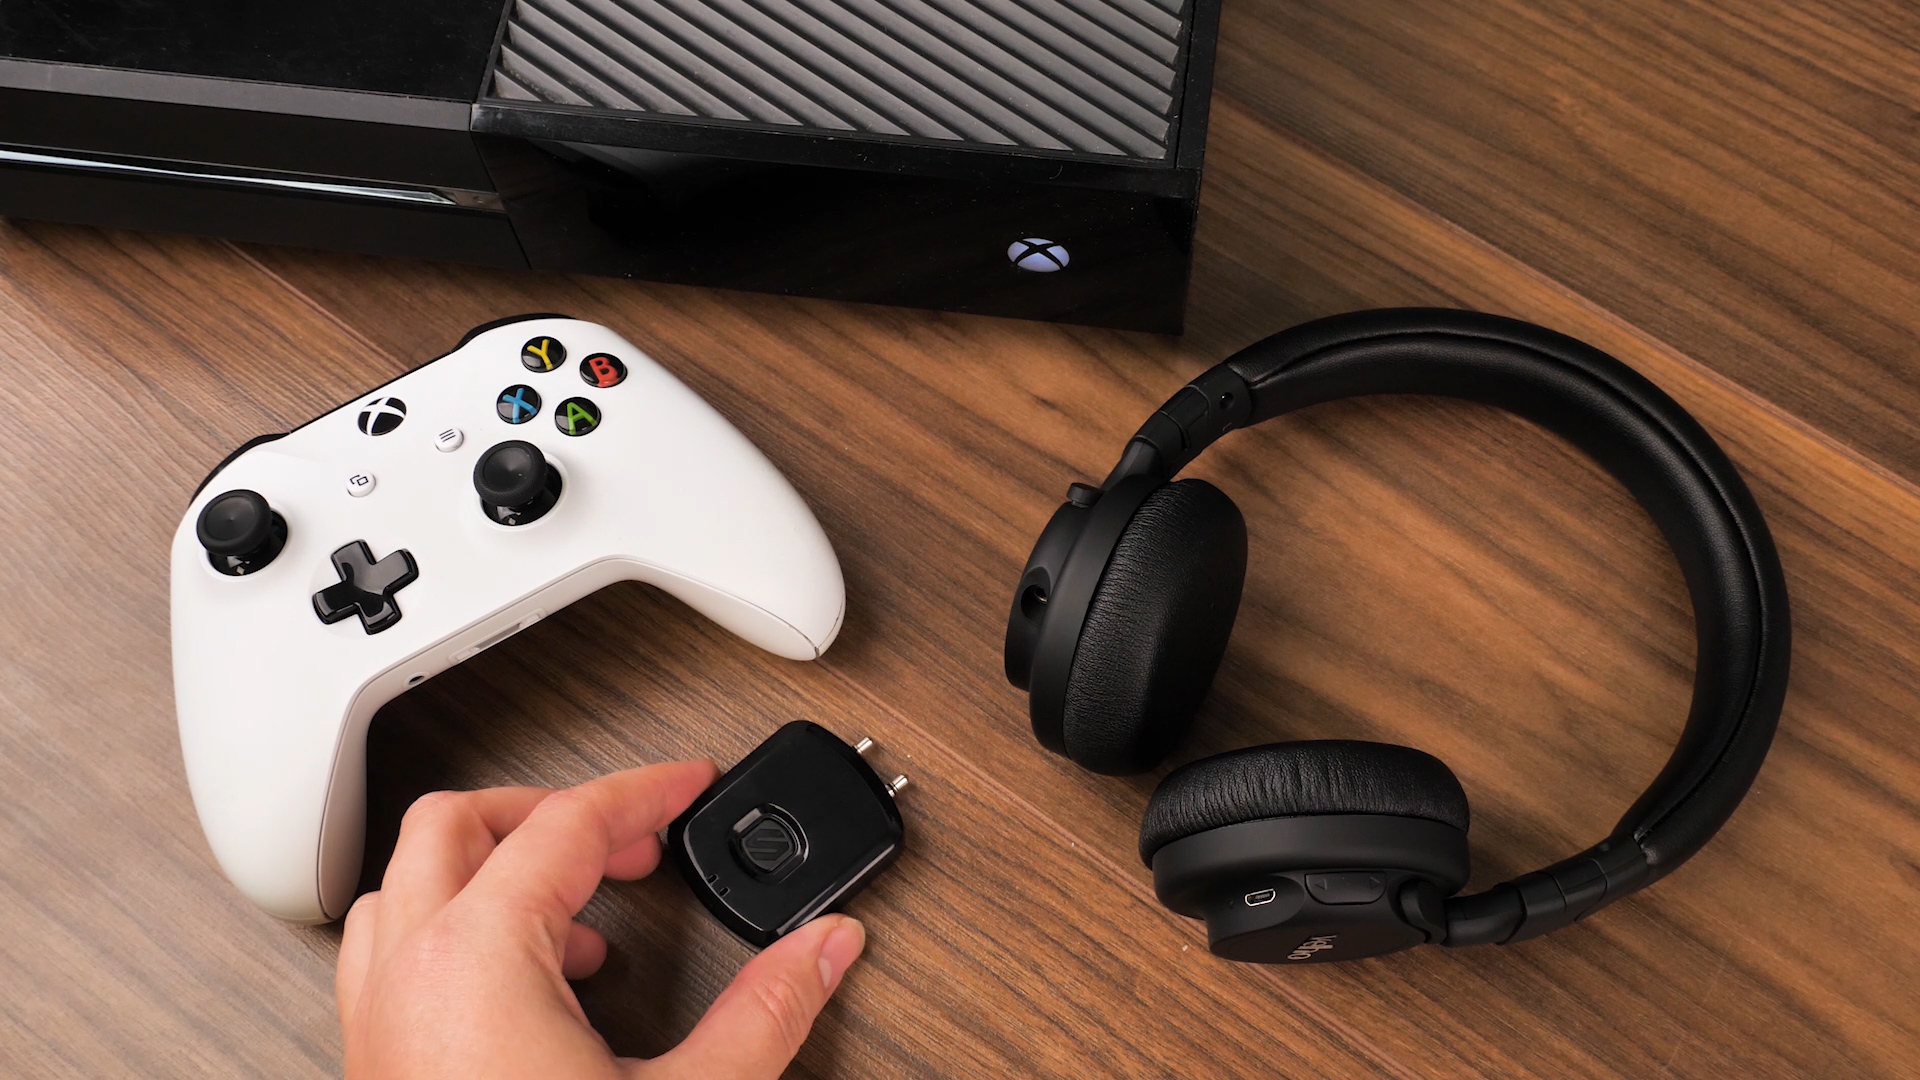 How to connect a wireless headset to a xbox one How To Connect Bluetooth Headphones To Xbox One Mobile Fun Blog